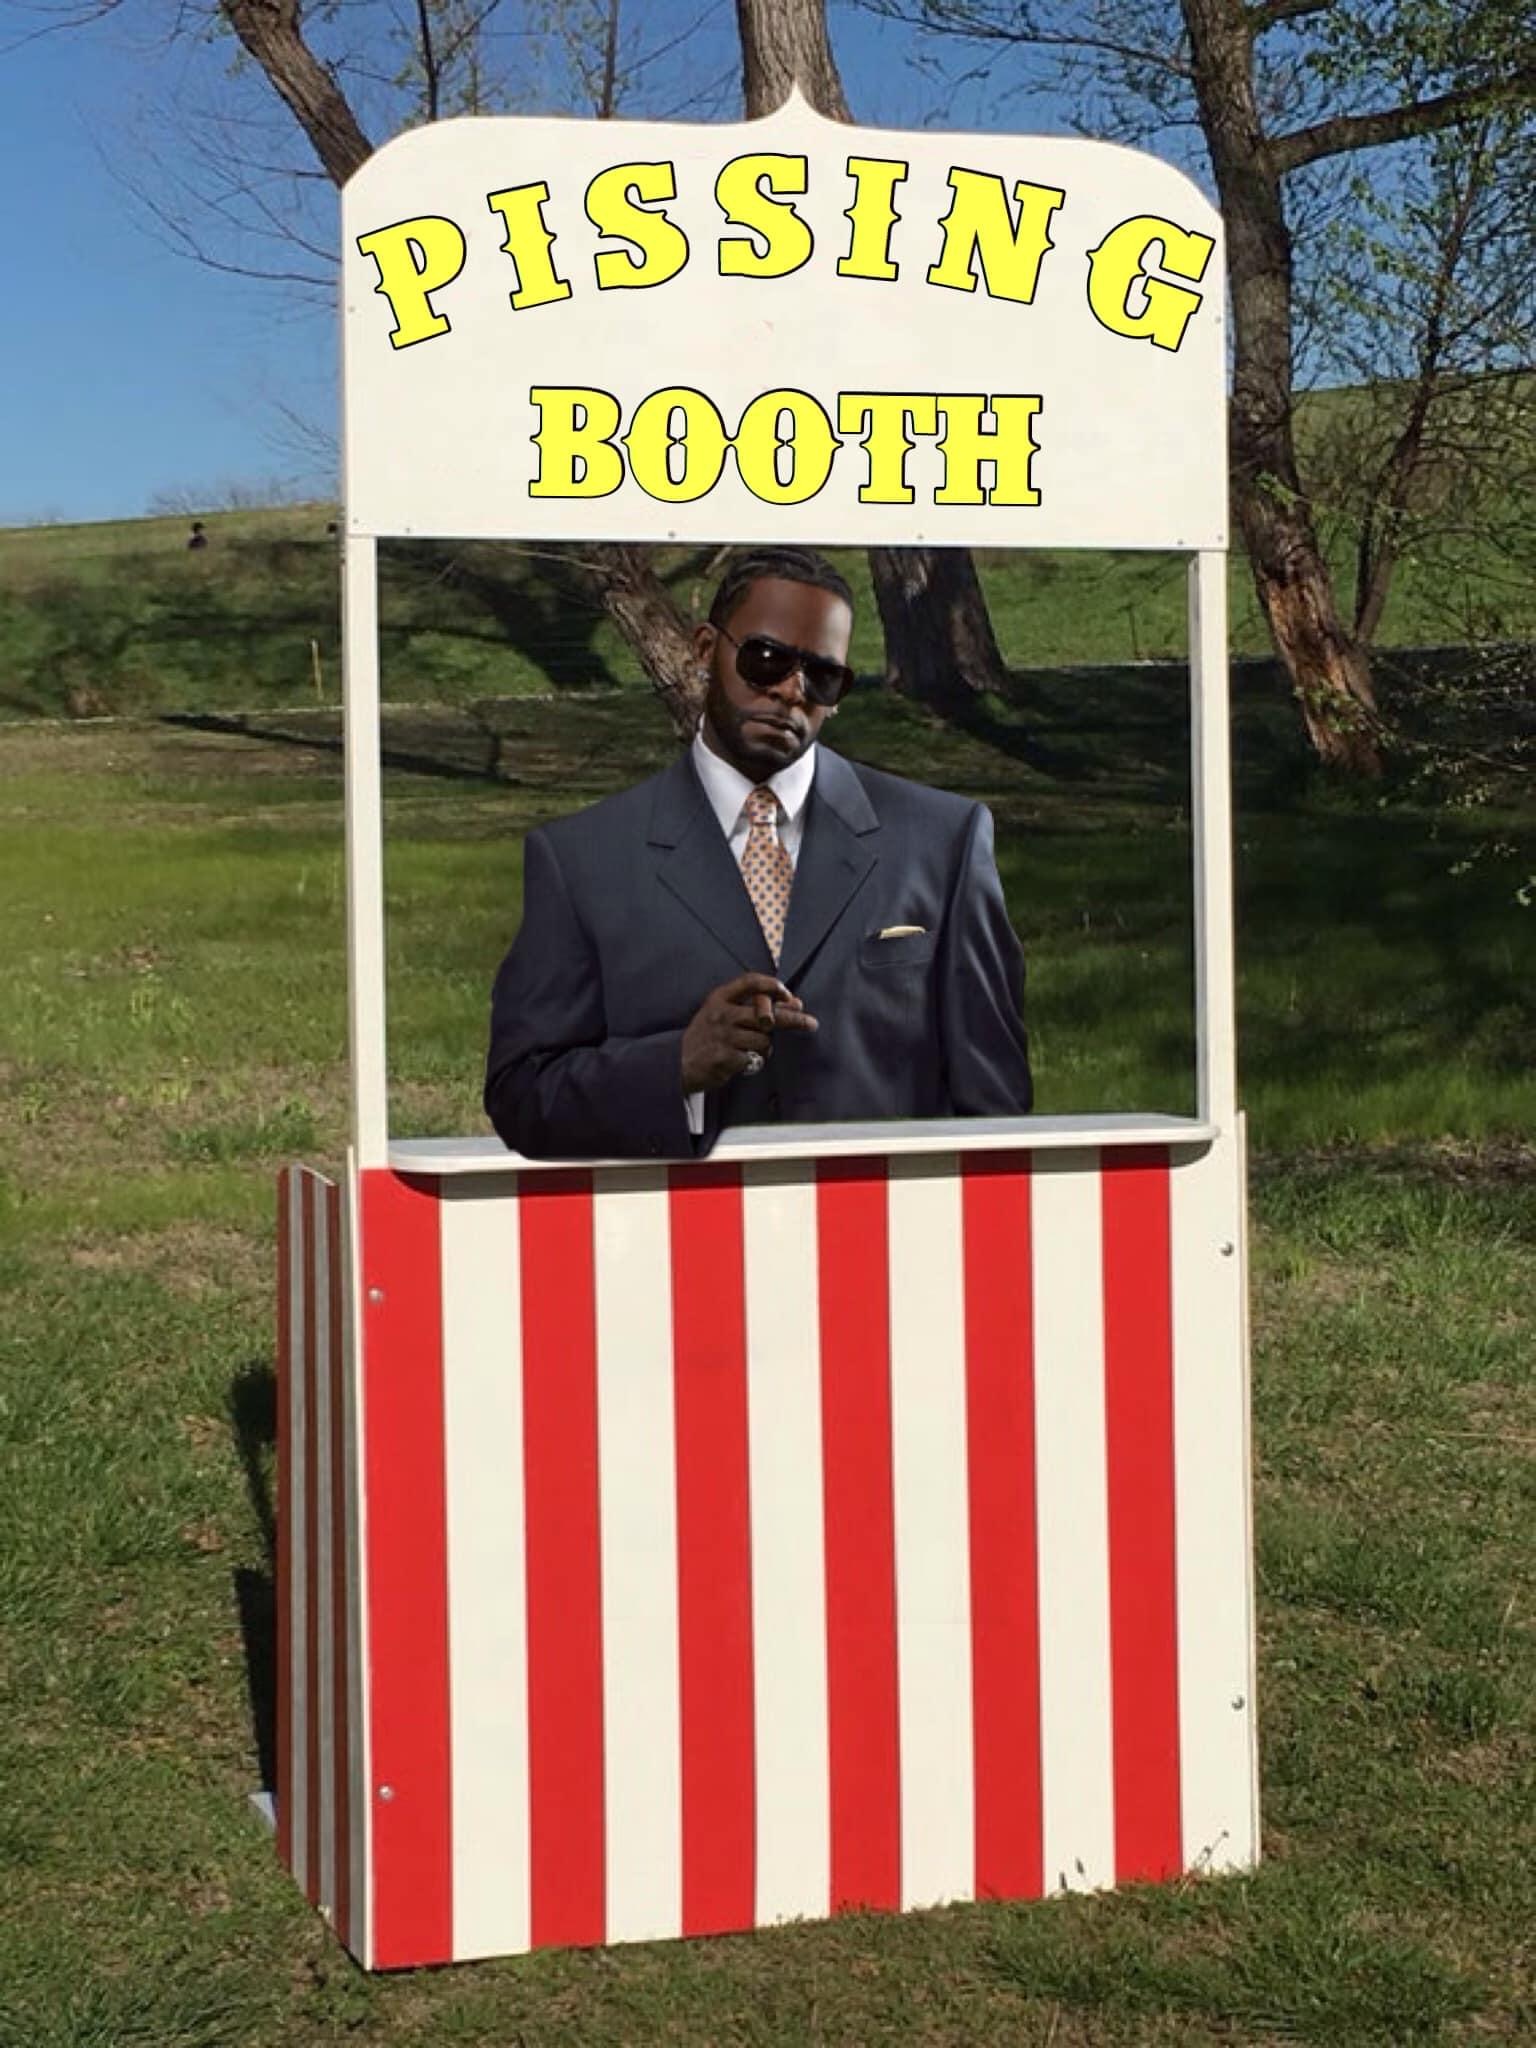 grass - Pissing Booth